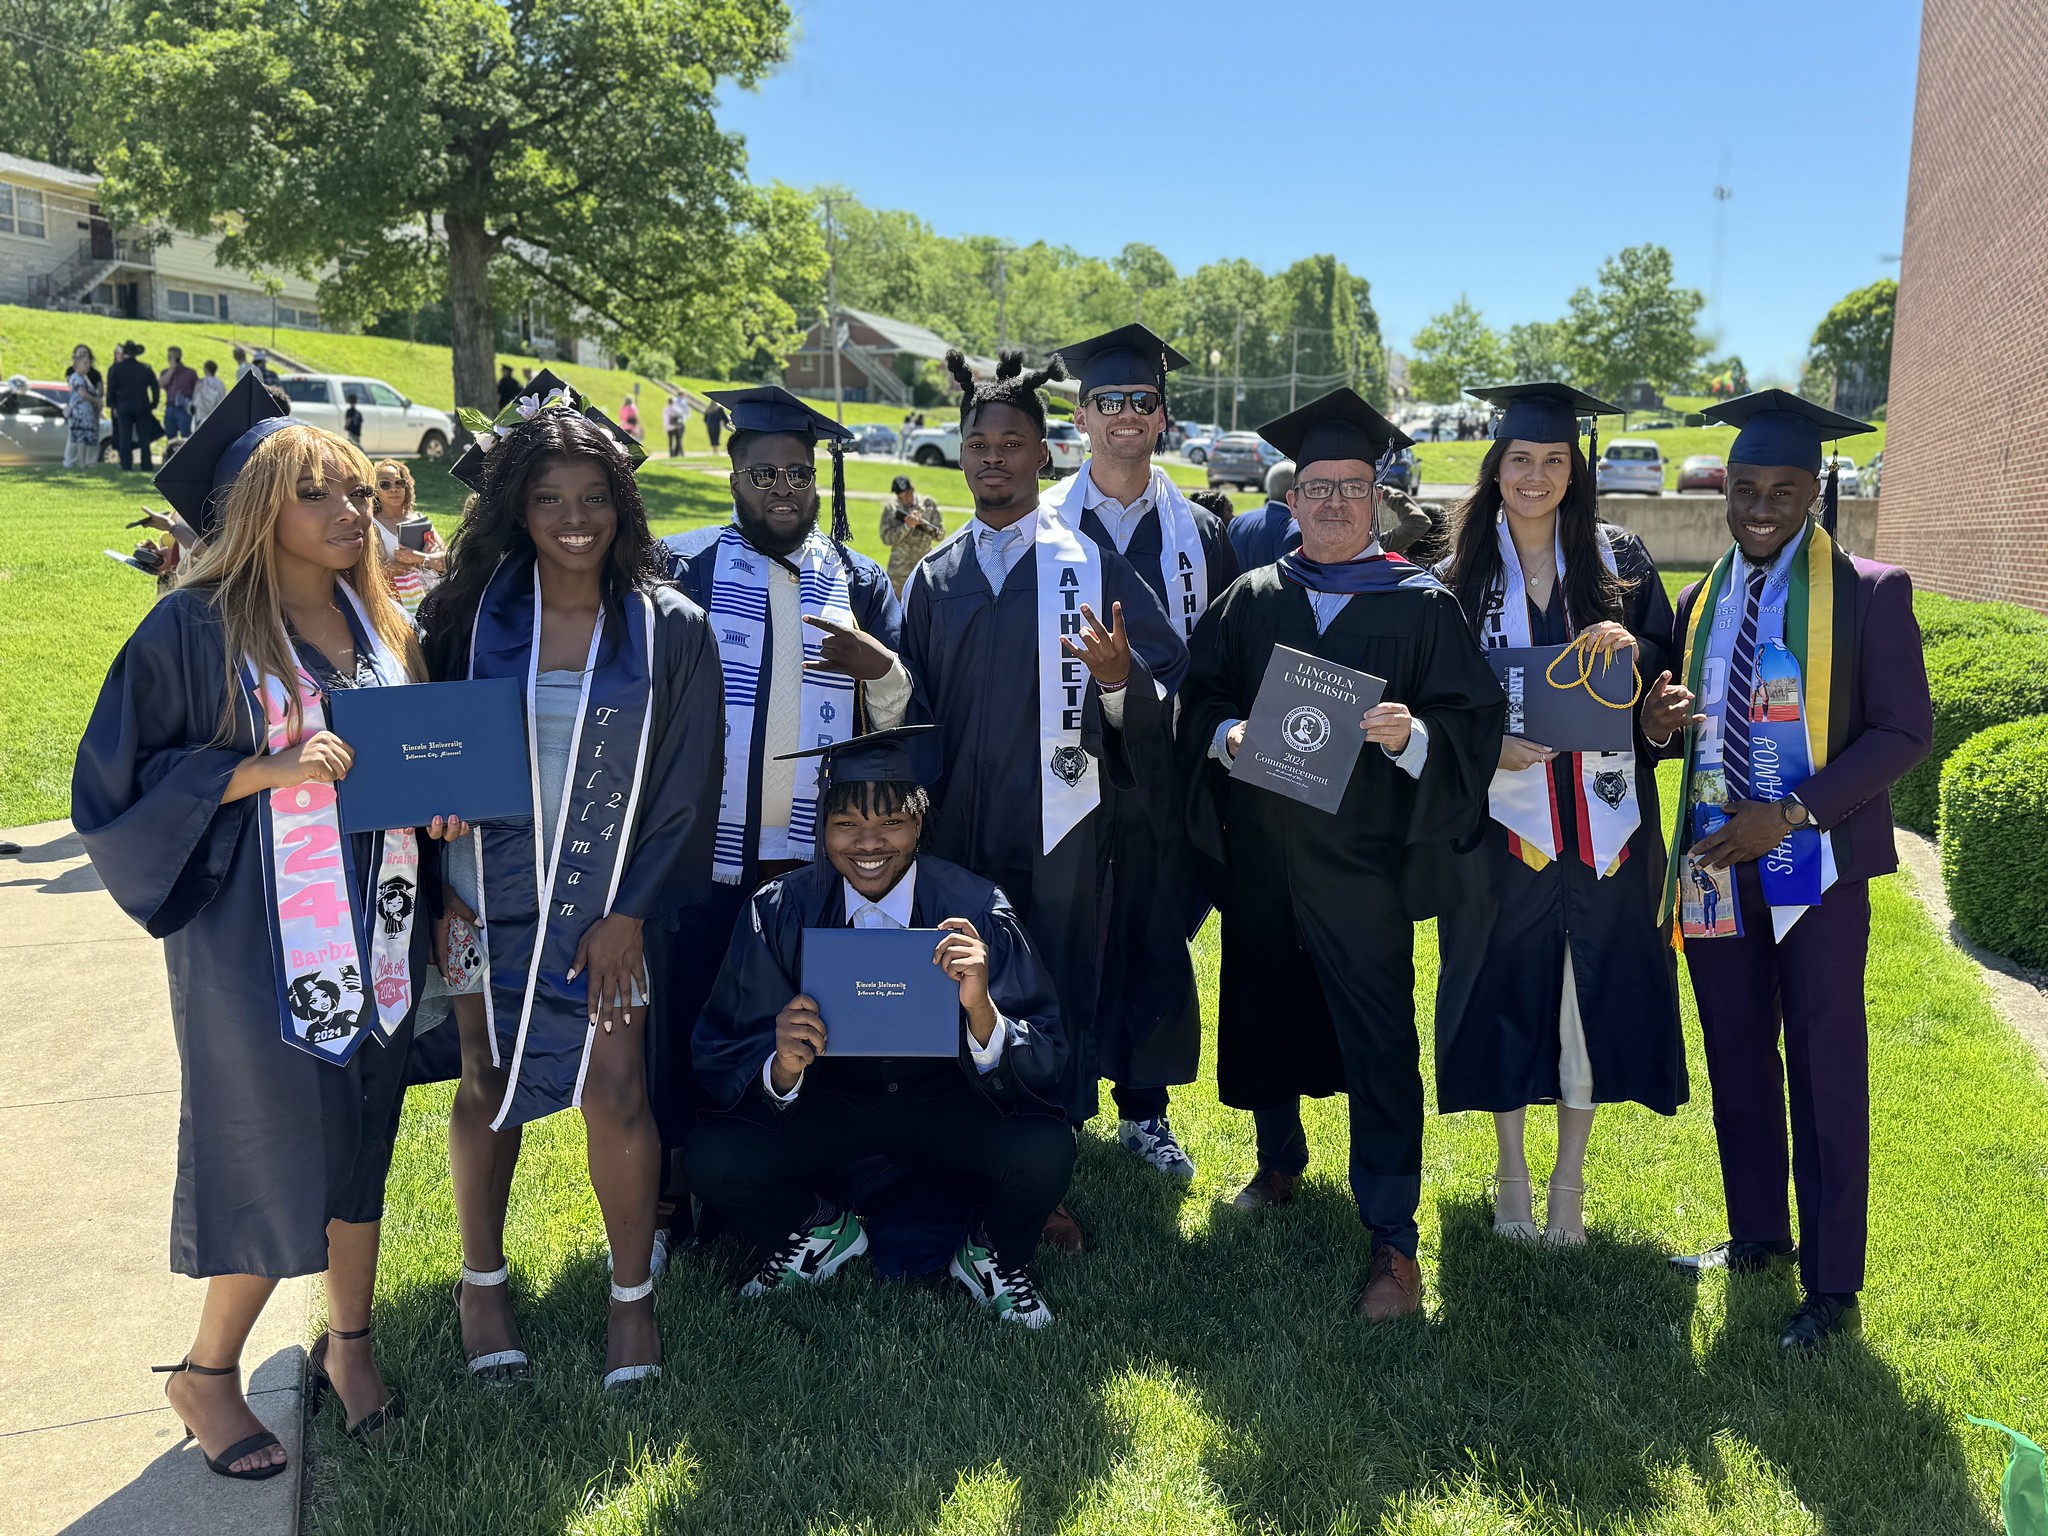 Over the past three years, Lincoln University of Missouri students' academic standing has substantially improved. Photo: LU Class of 2024 graduates celebrate their success on commencement day in May.